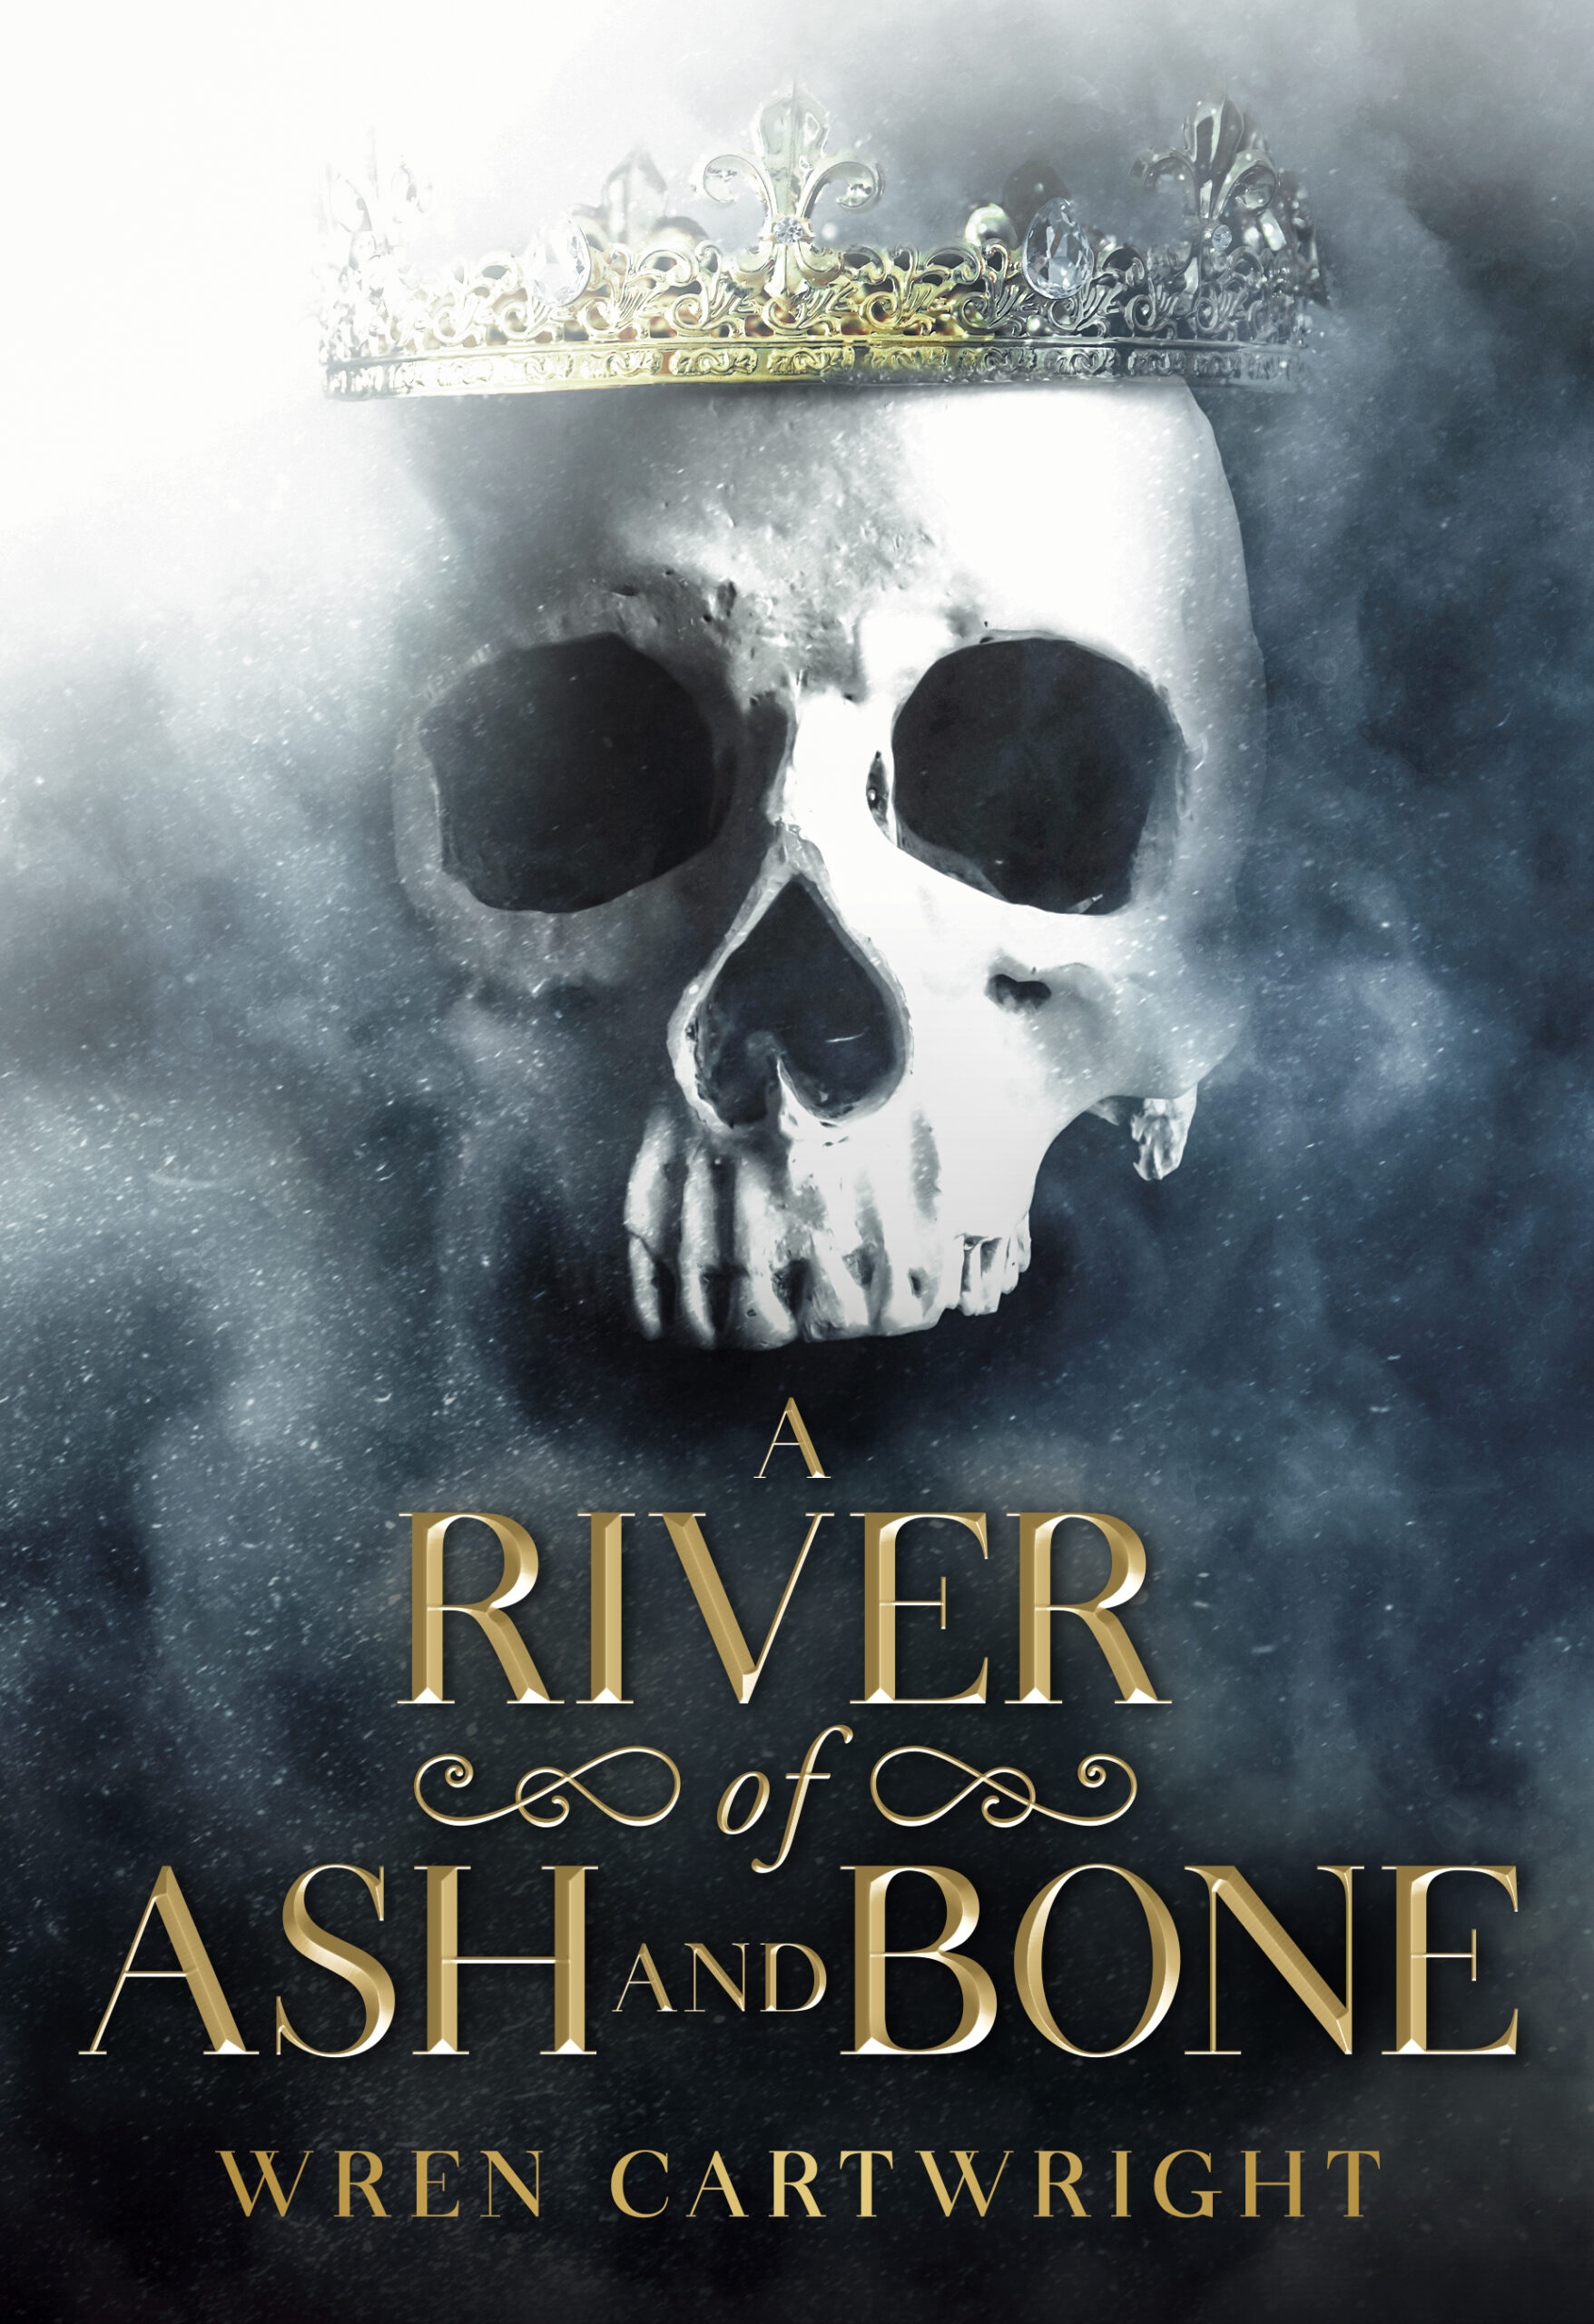 A River of Ash and Bone book cover